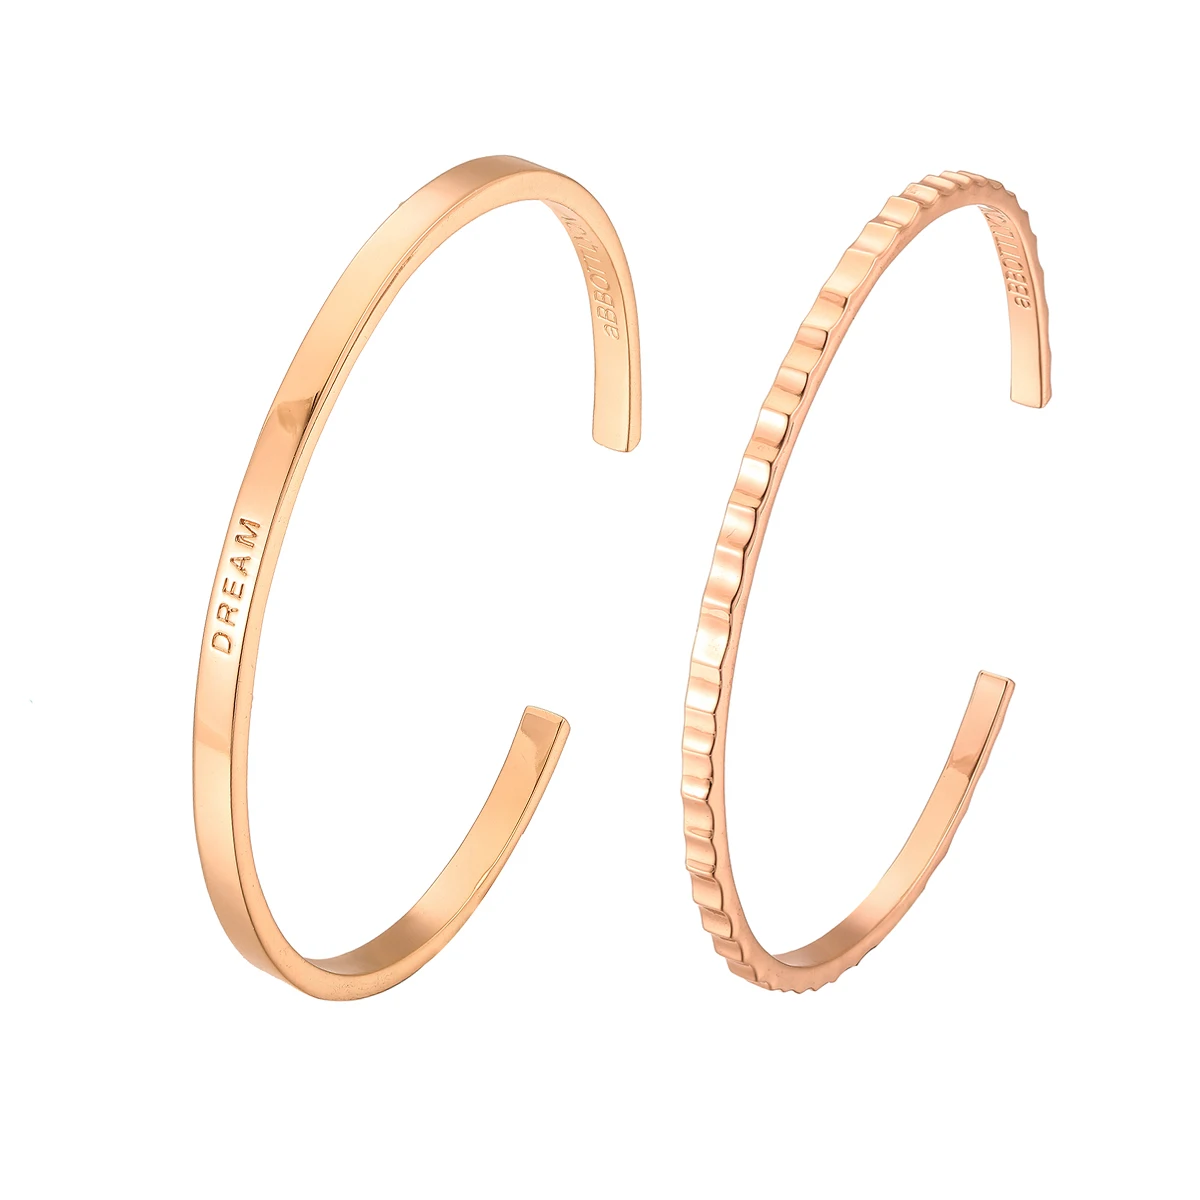 

Lucky charm luxury cuff gold filled ladies cuban link stainless steel bracelets charms for bracelet making 316l jewelry, Different color is available